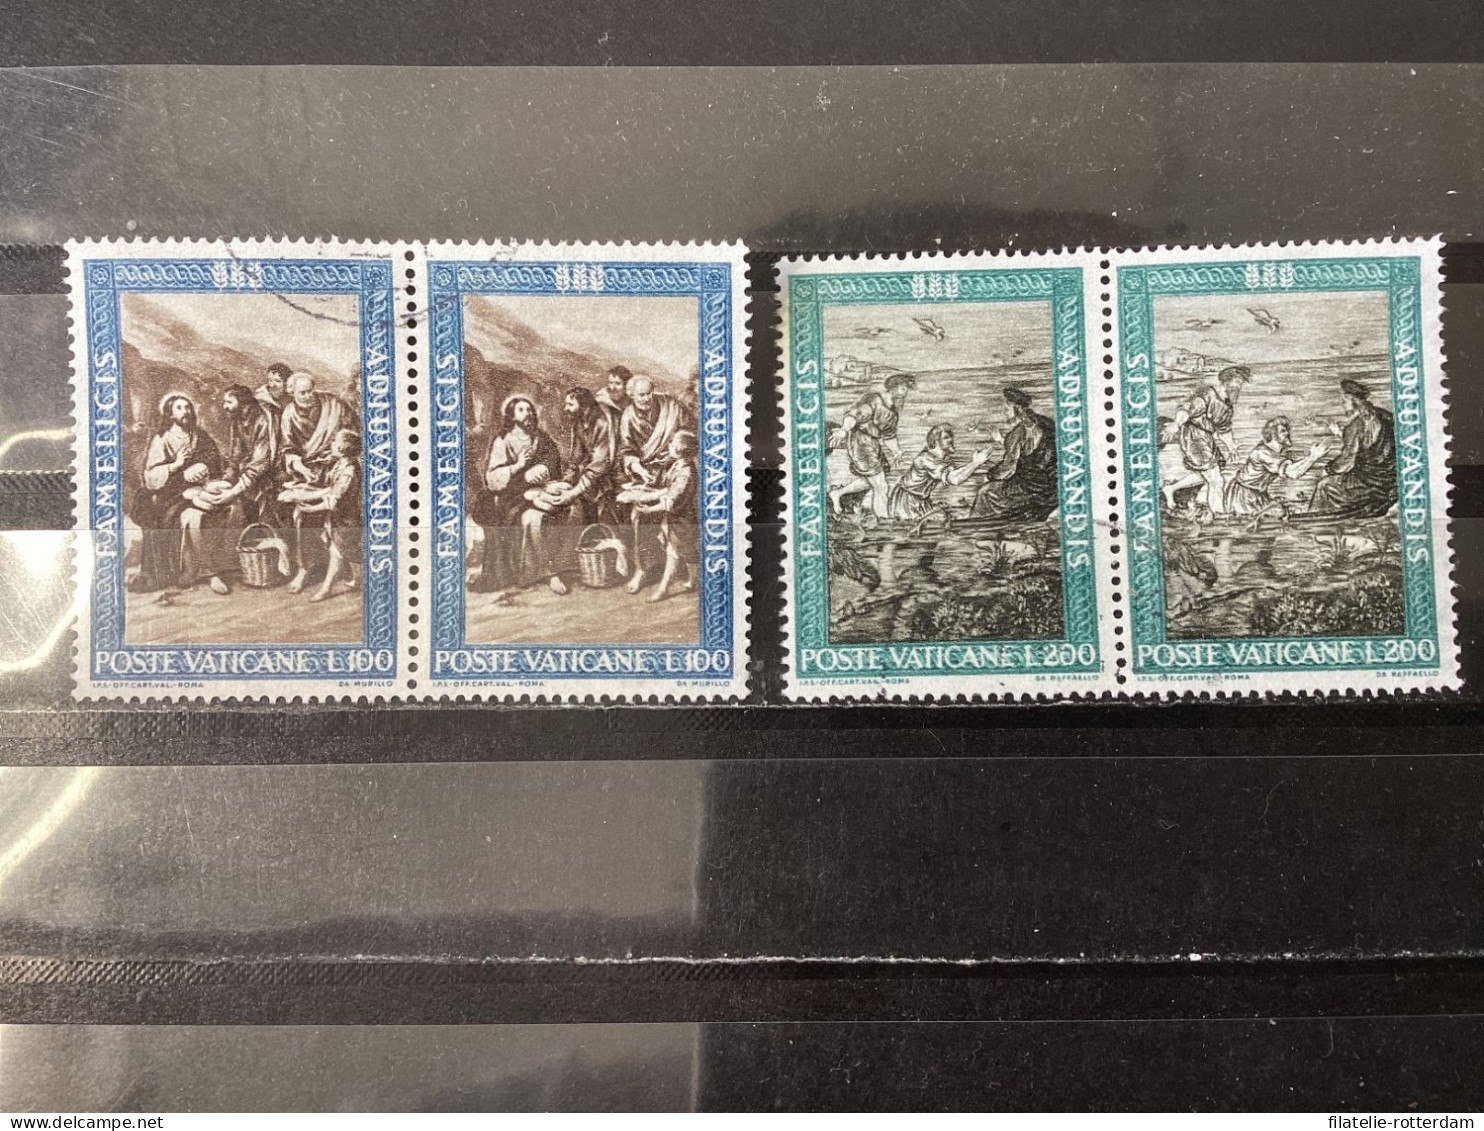 Vatican City / Vaticaanstad - Set Fight Against Hunger 1963 - Used Stamps